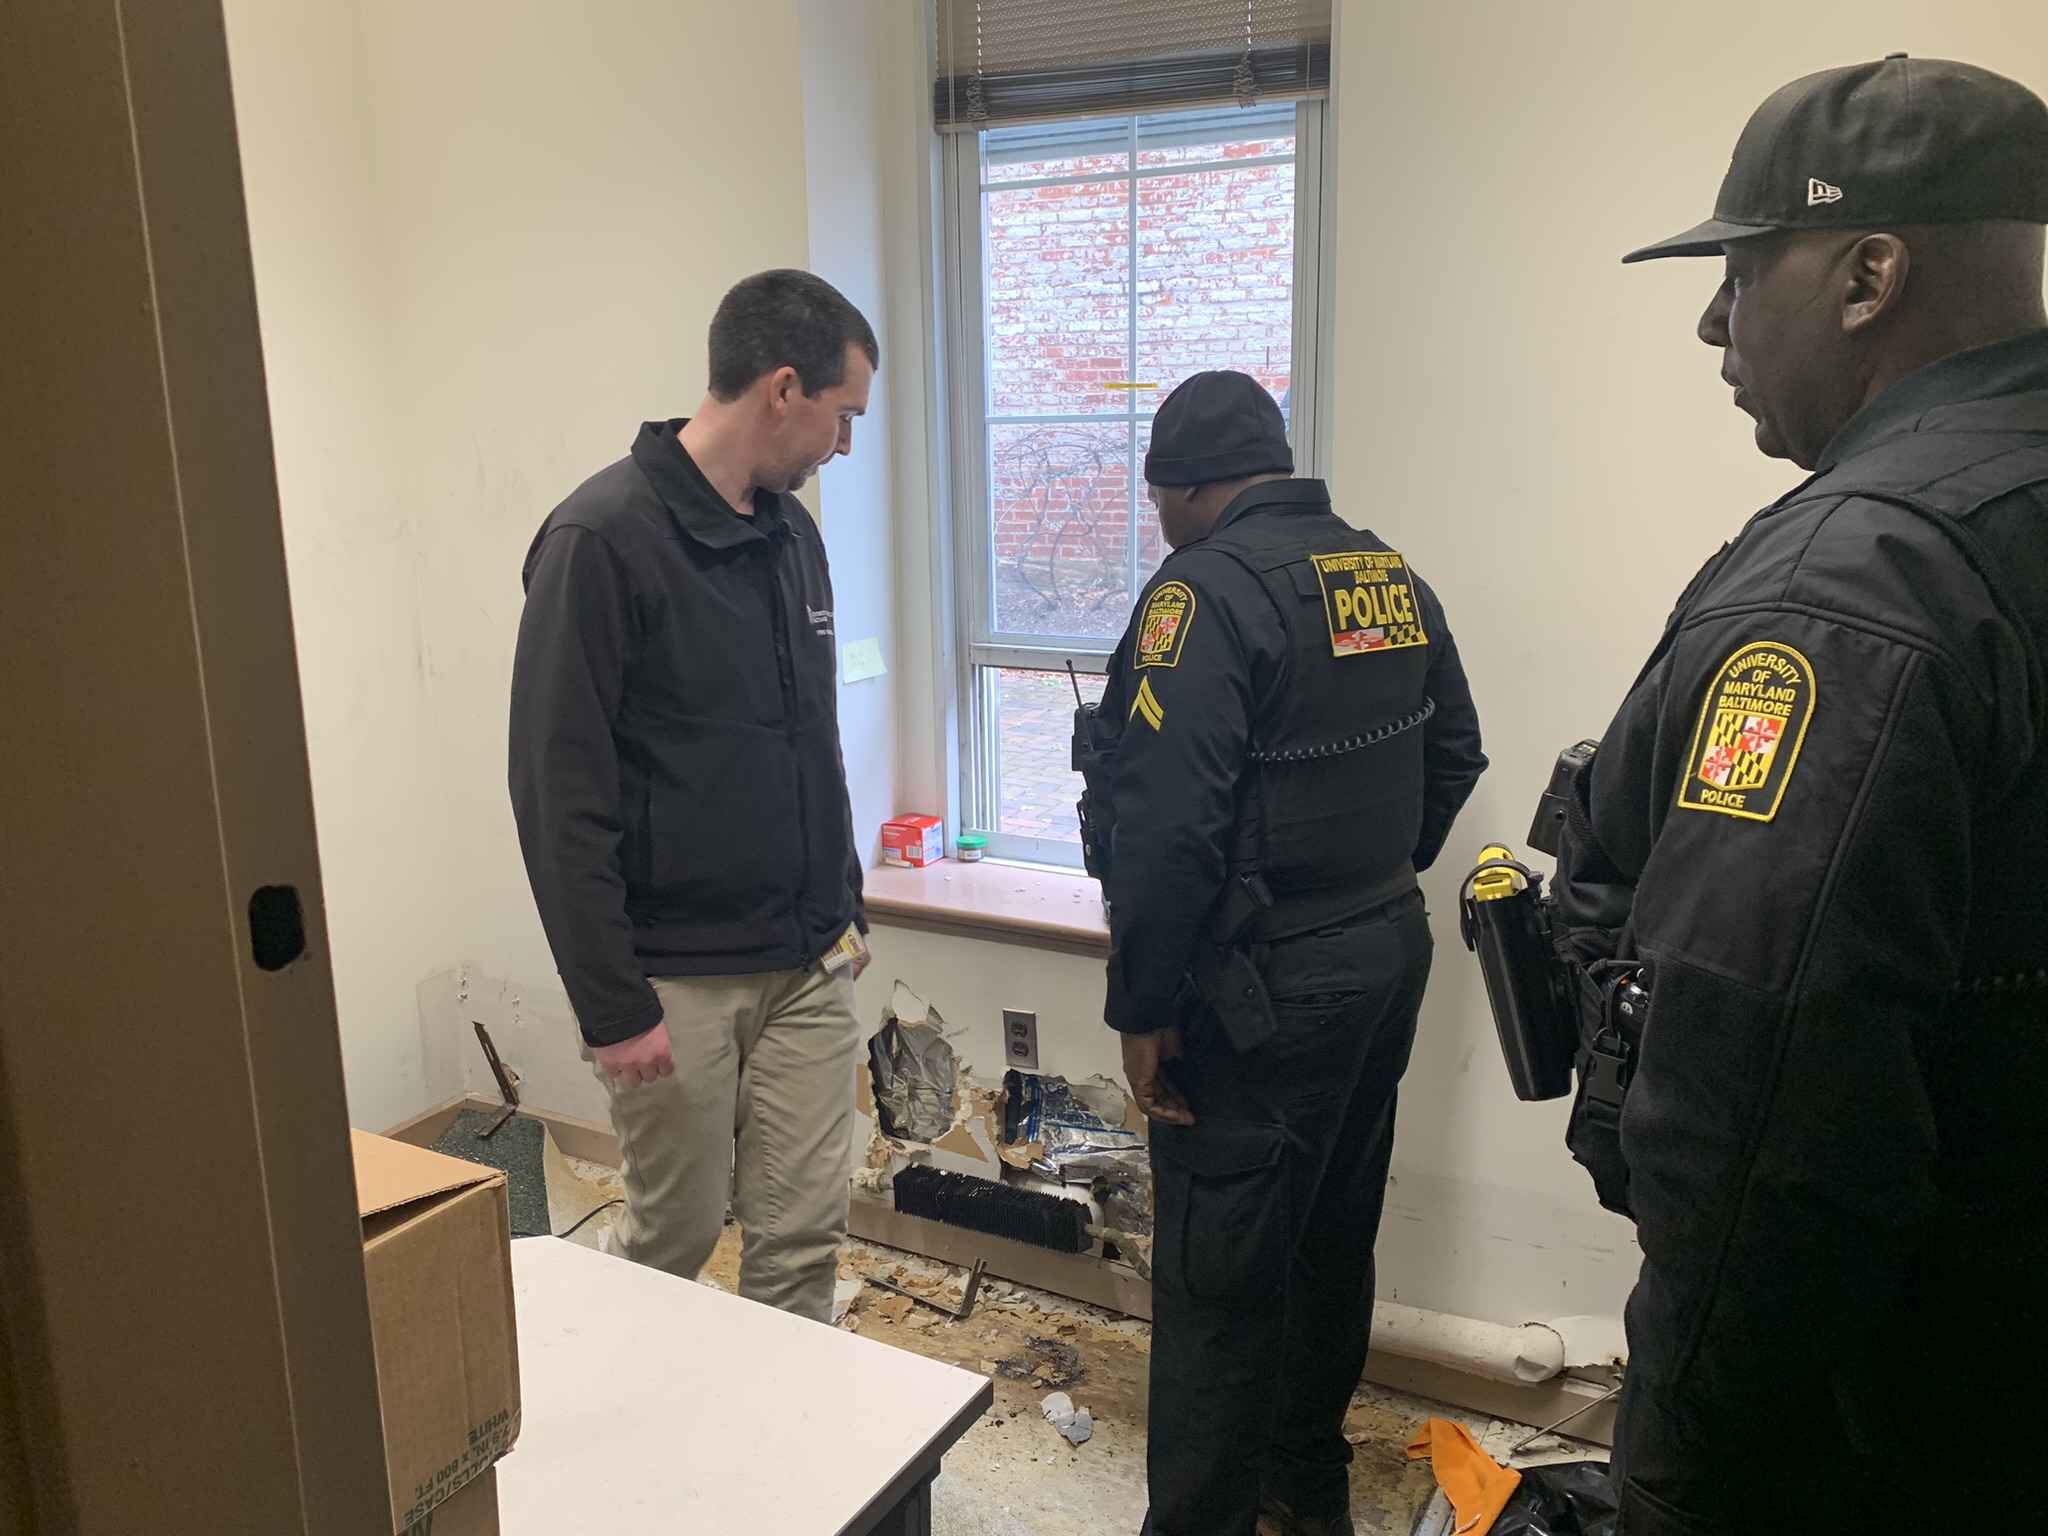 UMB Fire Marshal and UMB police officers examine damage from space heater fire